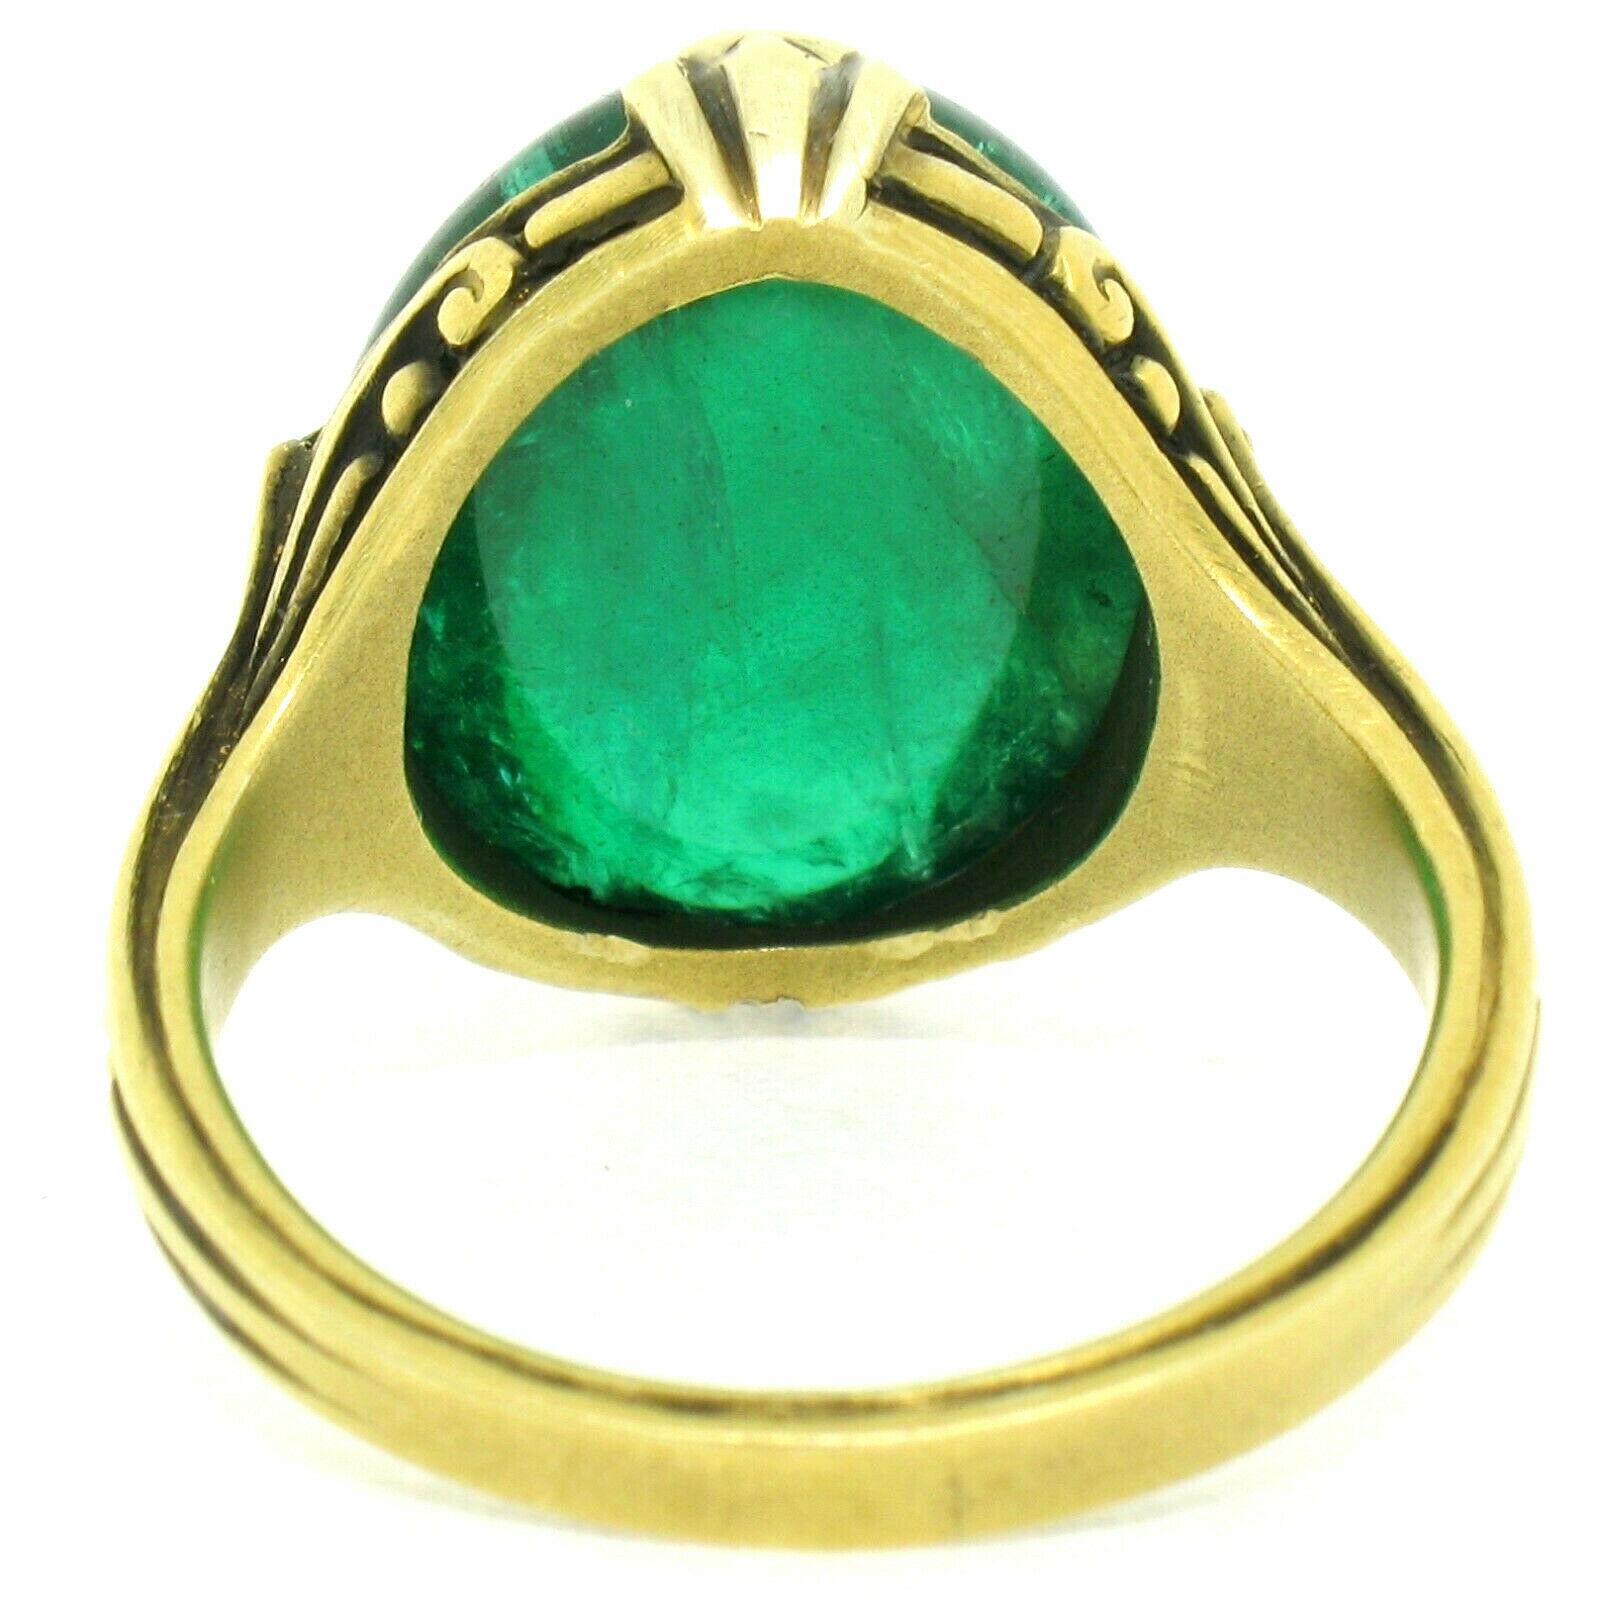 Antique 14k Gold 10.03ct GIA Oval Cabochon Very Fine Green Zambian Emerald Ring 2